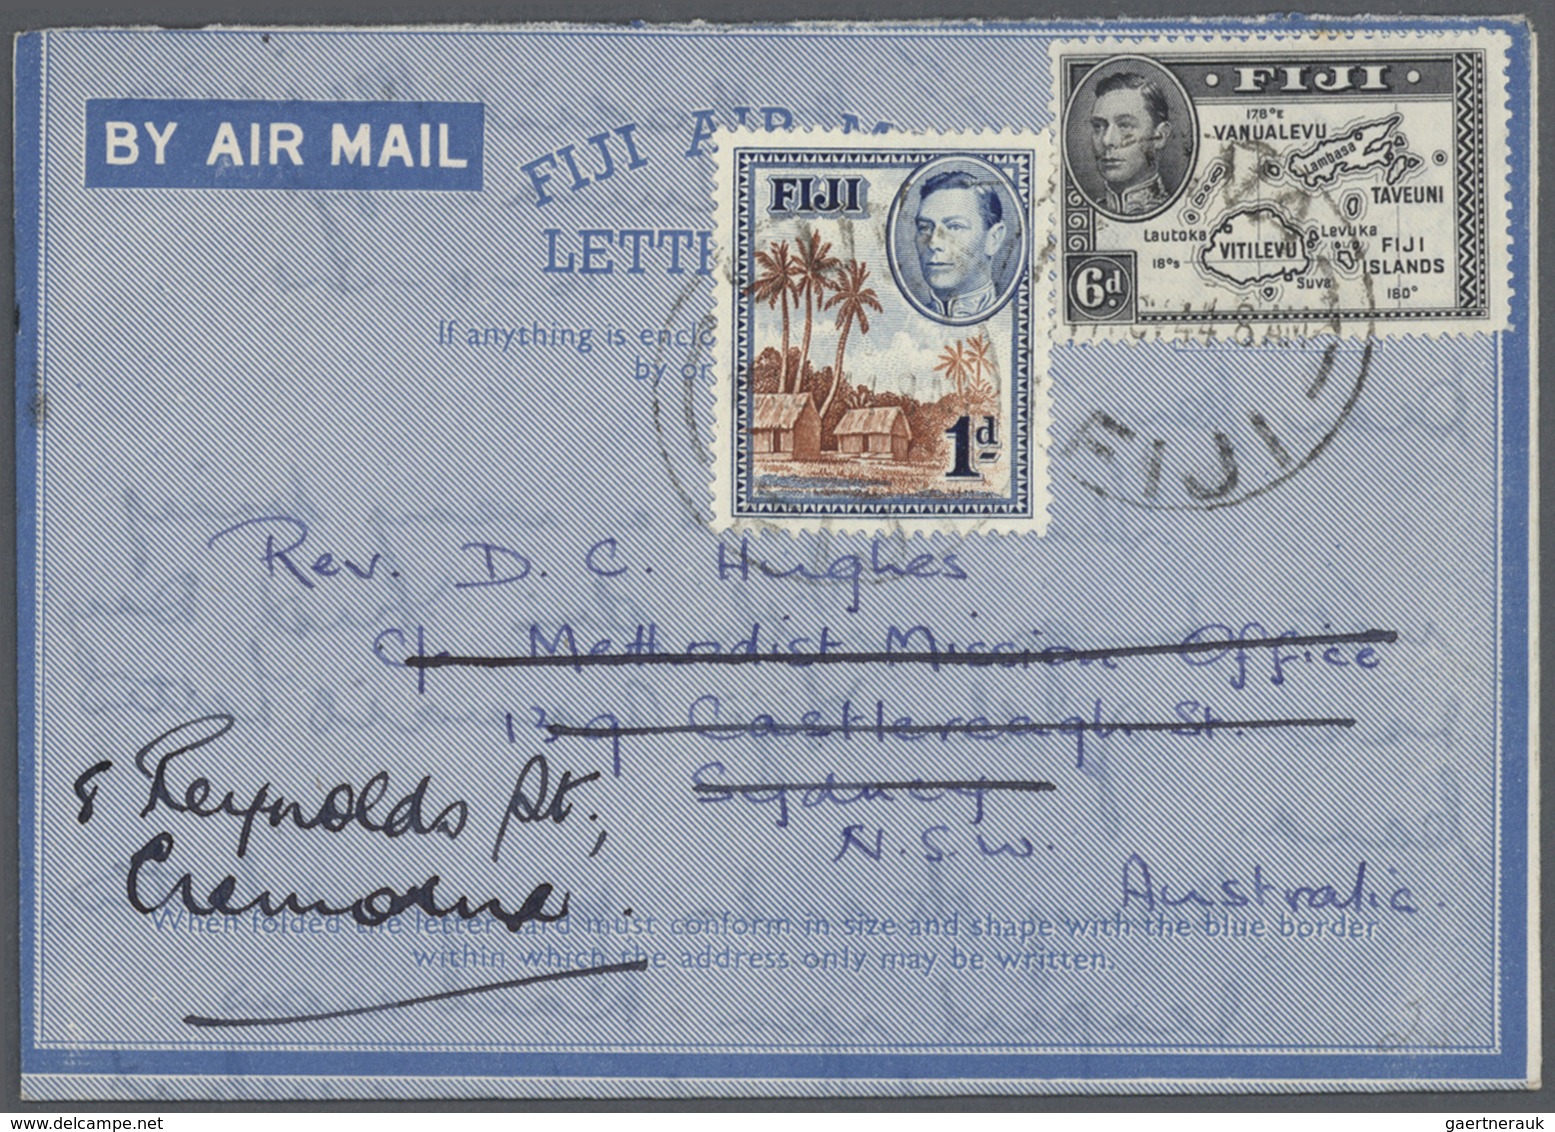 Fiji-Inseln: 1944/1990 (ca.), accumulation with about 540 unused and used/CTO airletters and AEROGRA